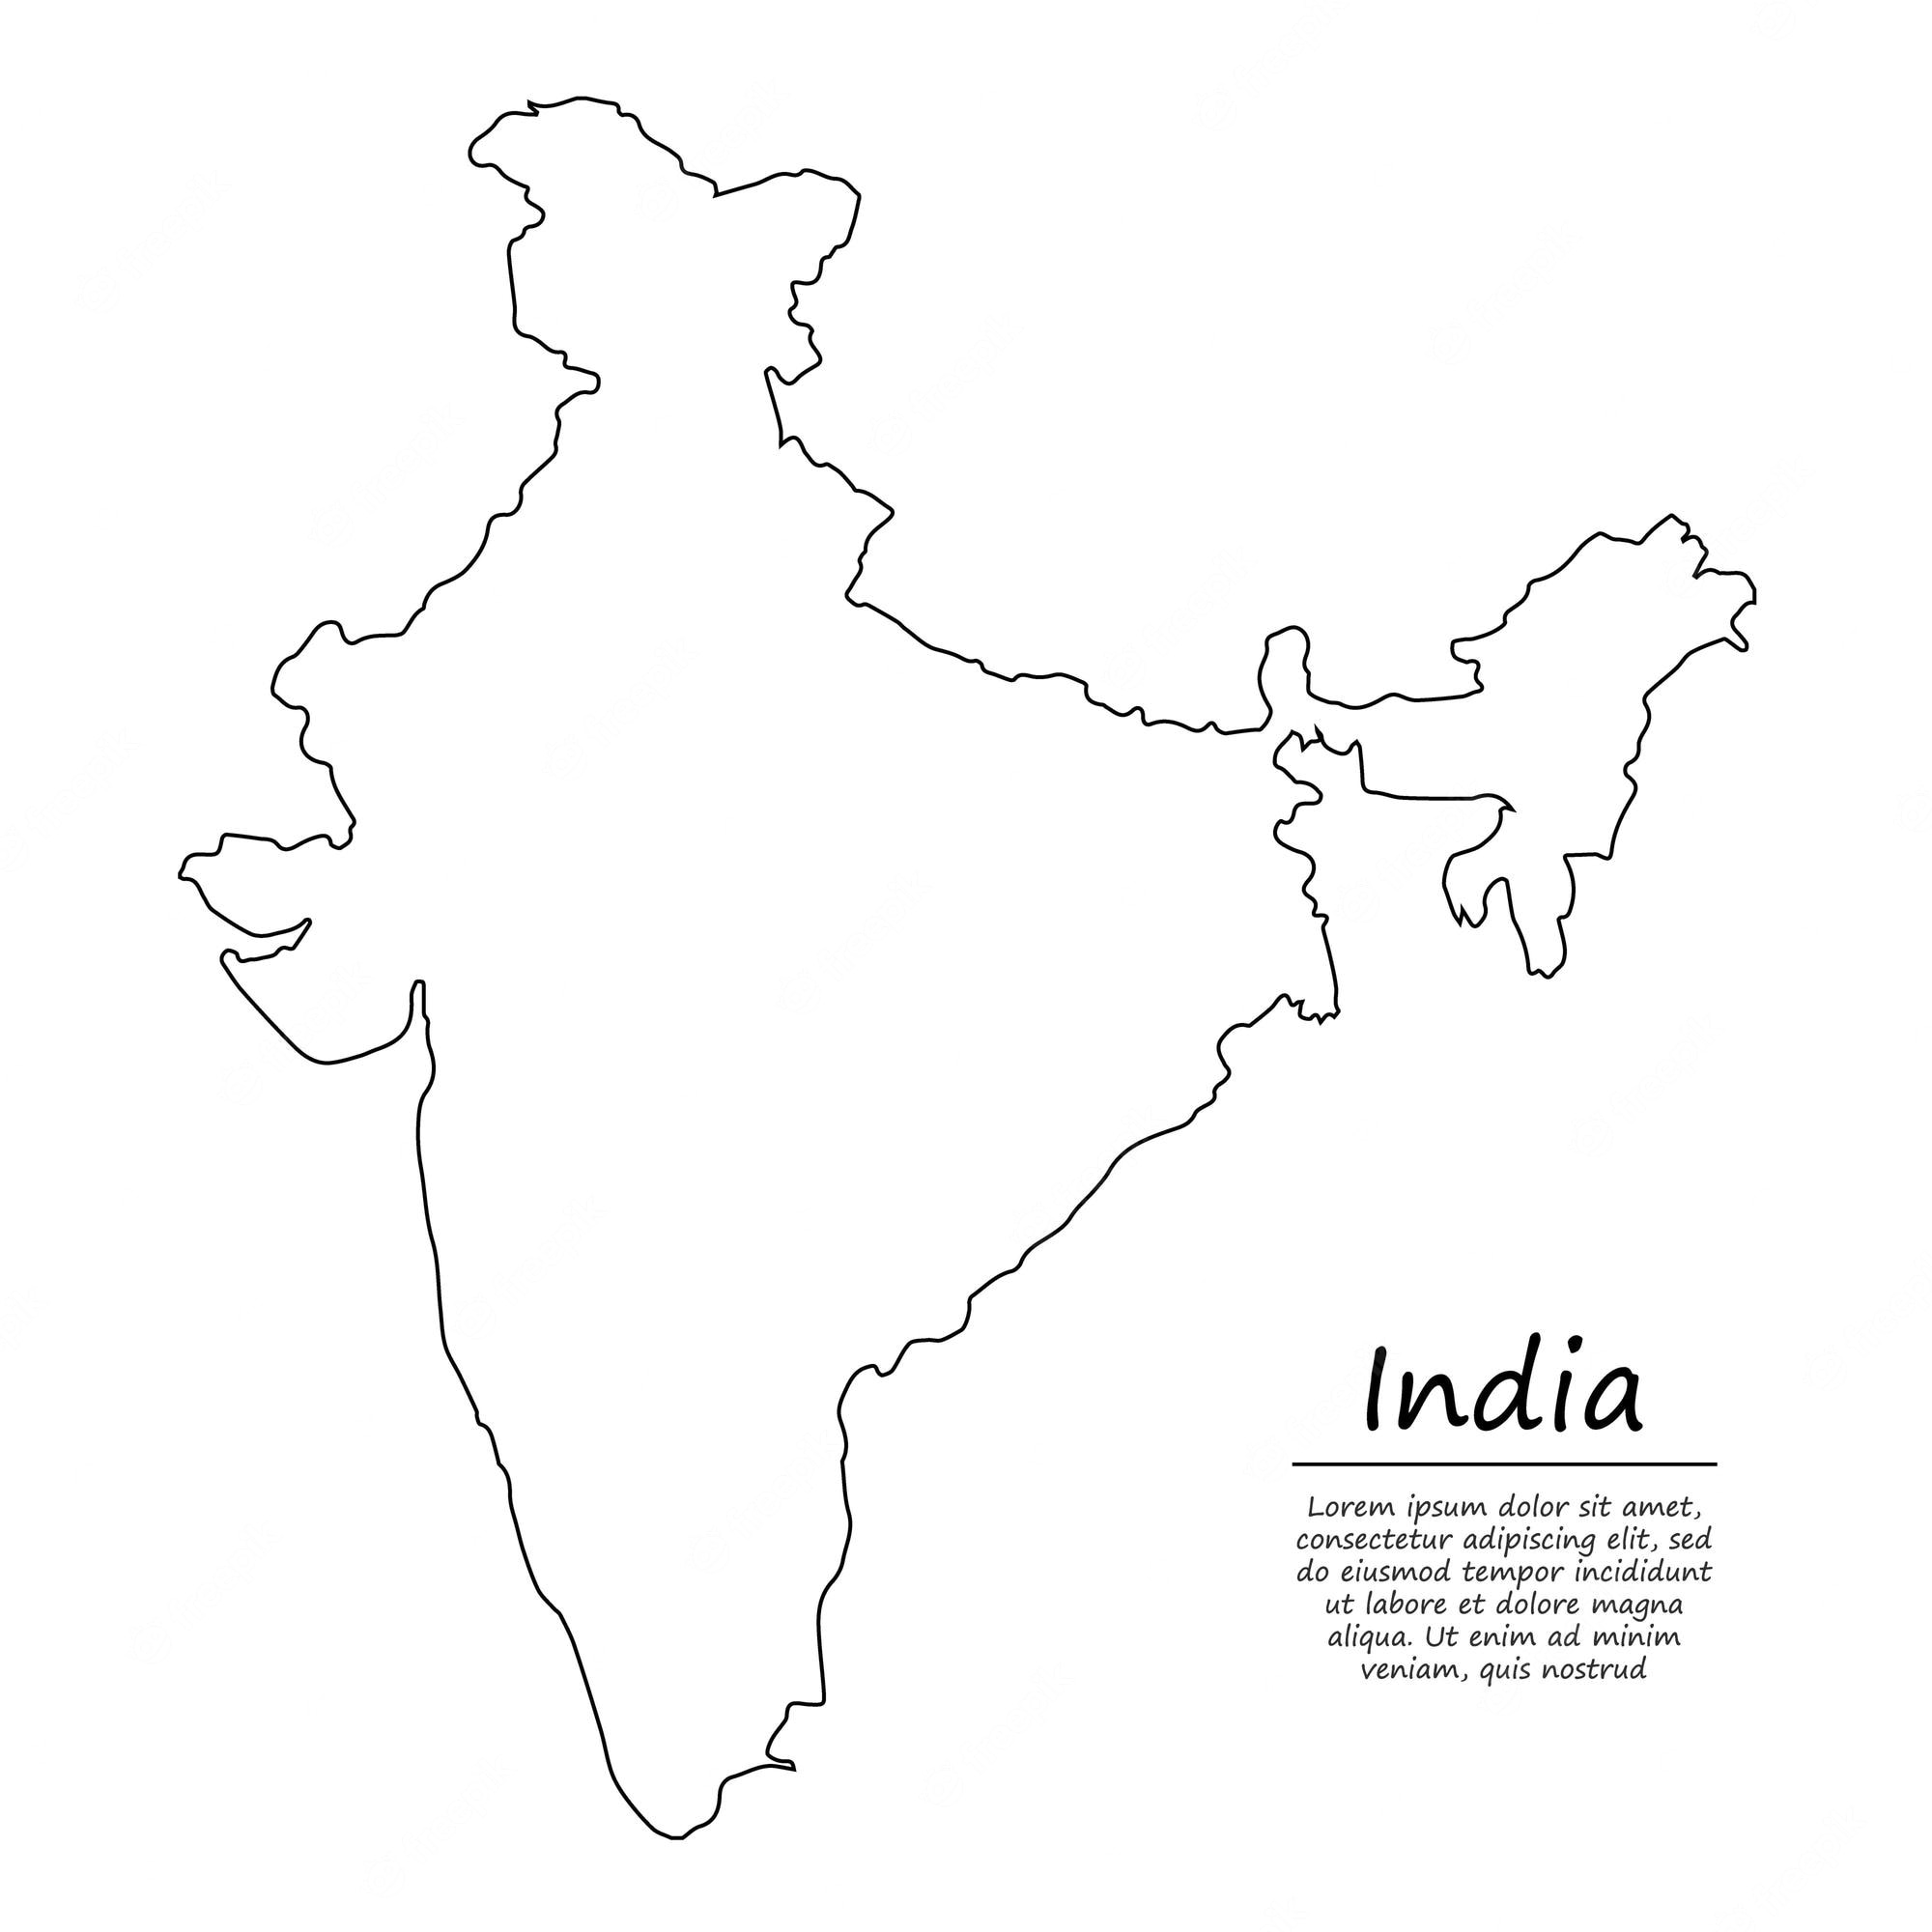 India Map Sketch With Color Pencils On Grid Paper High-Res Vector Graphic -  Getty Images